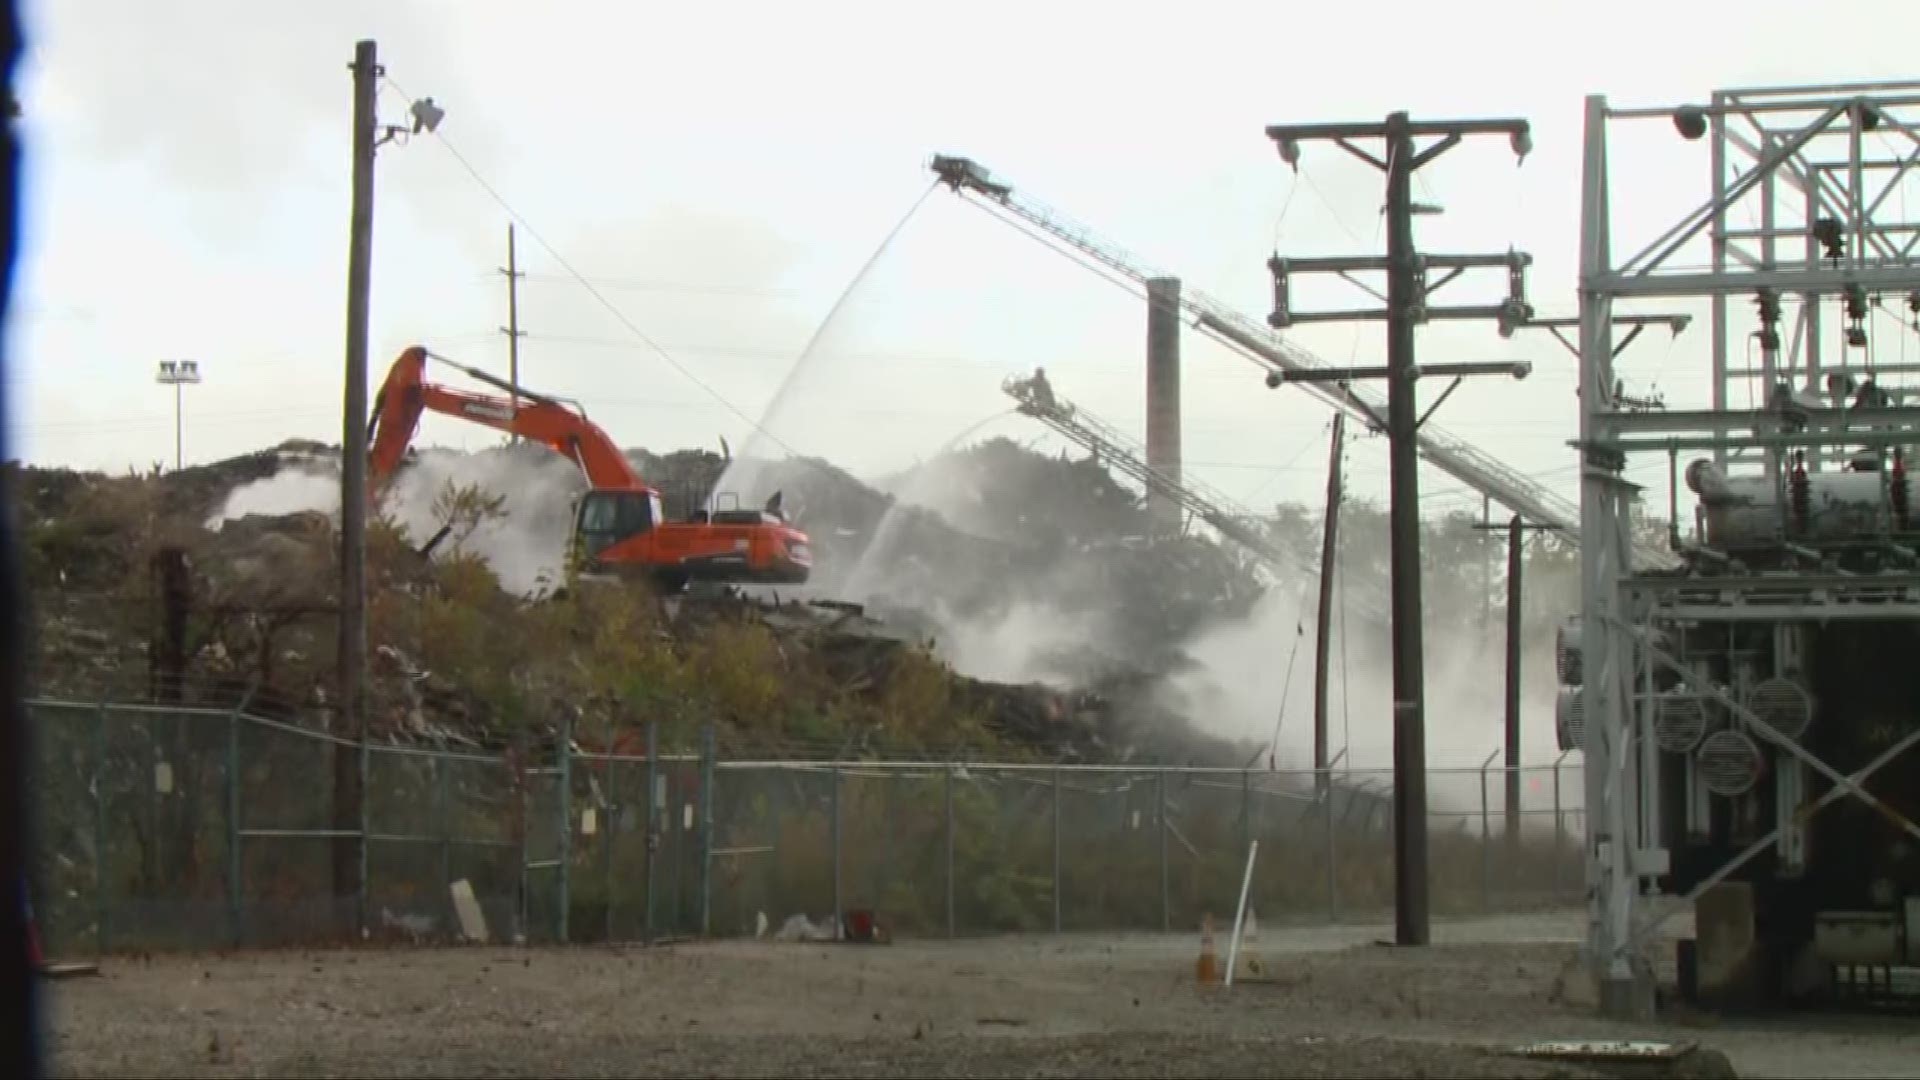 State board approves $3.25 million to clean East Cleveland dump